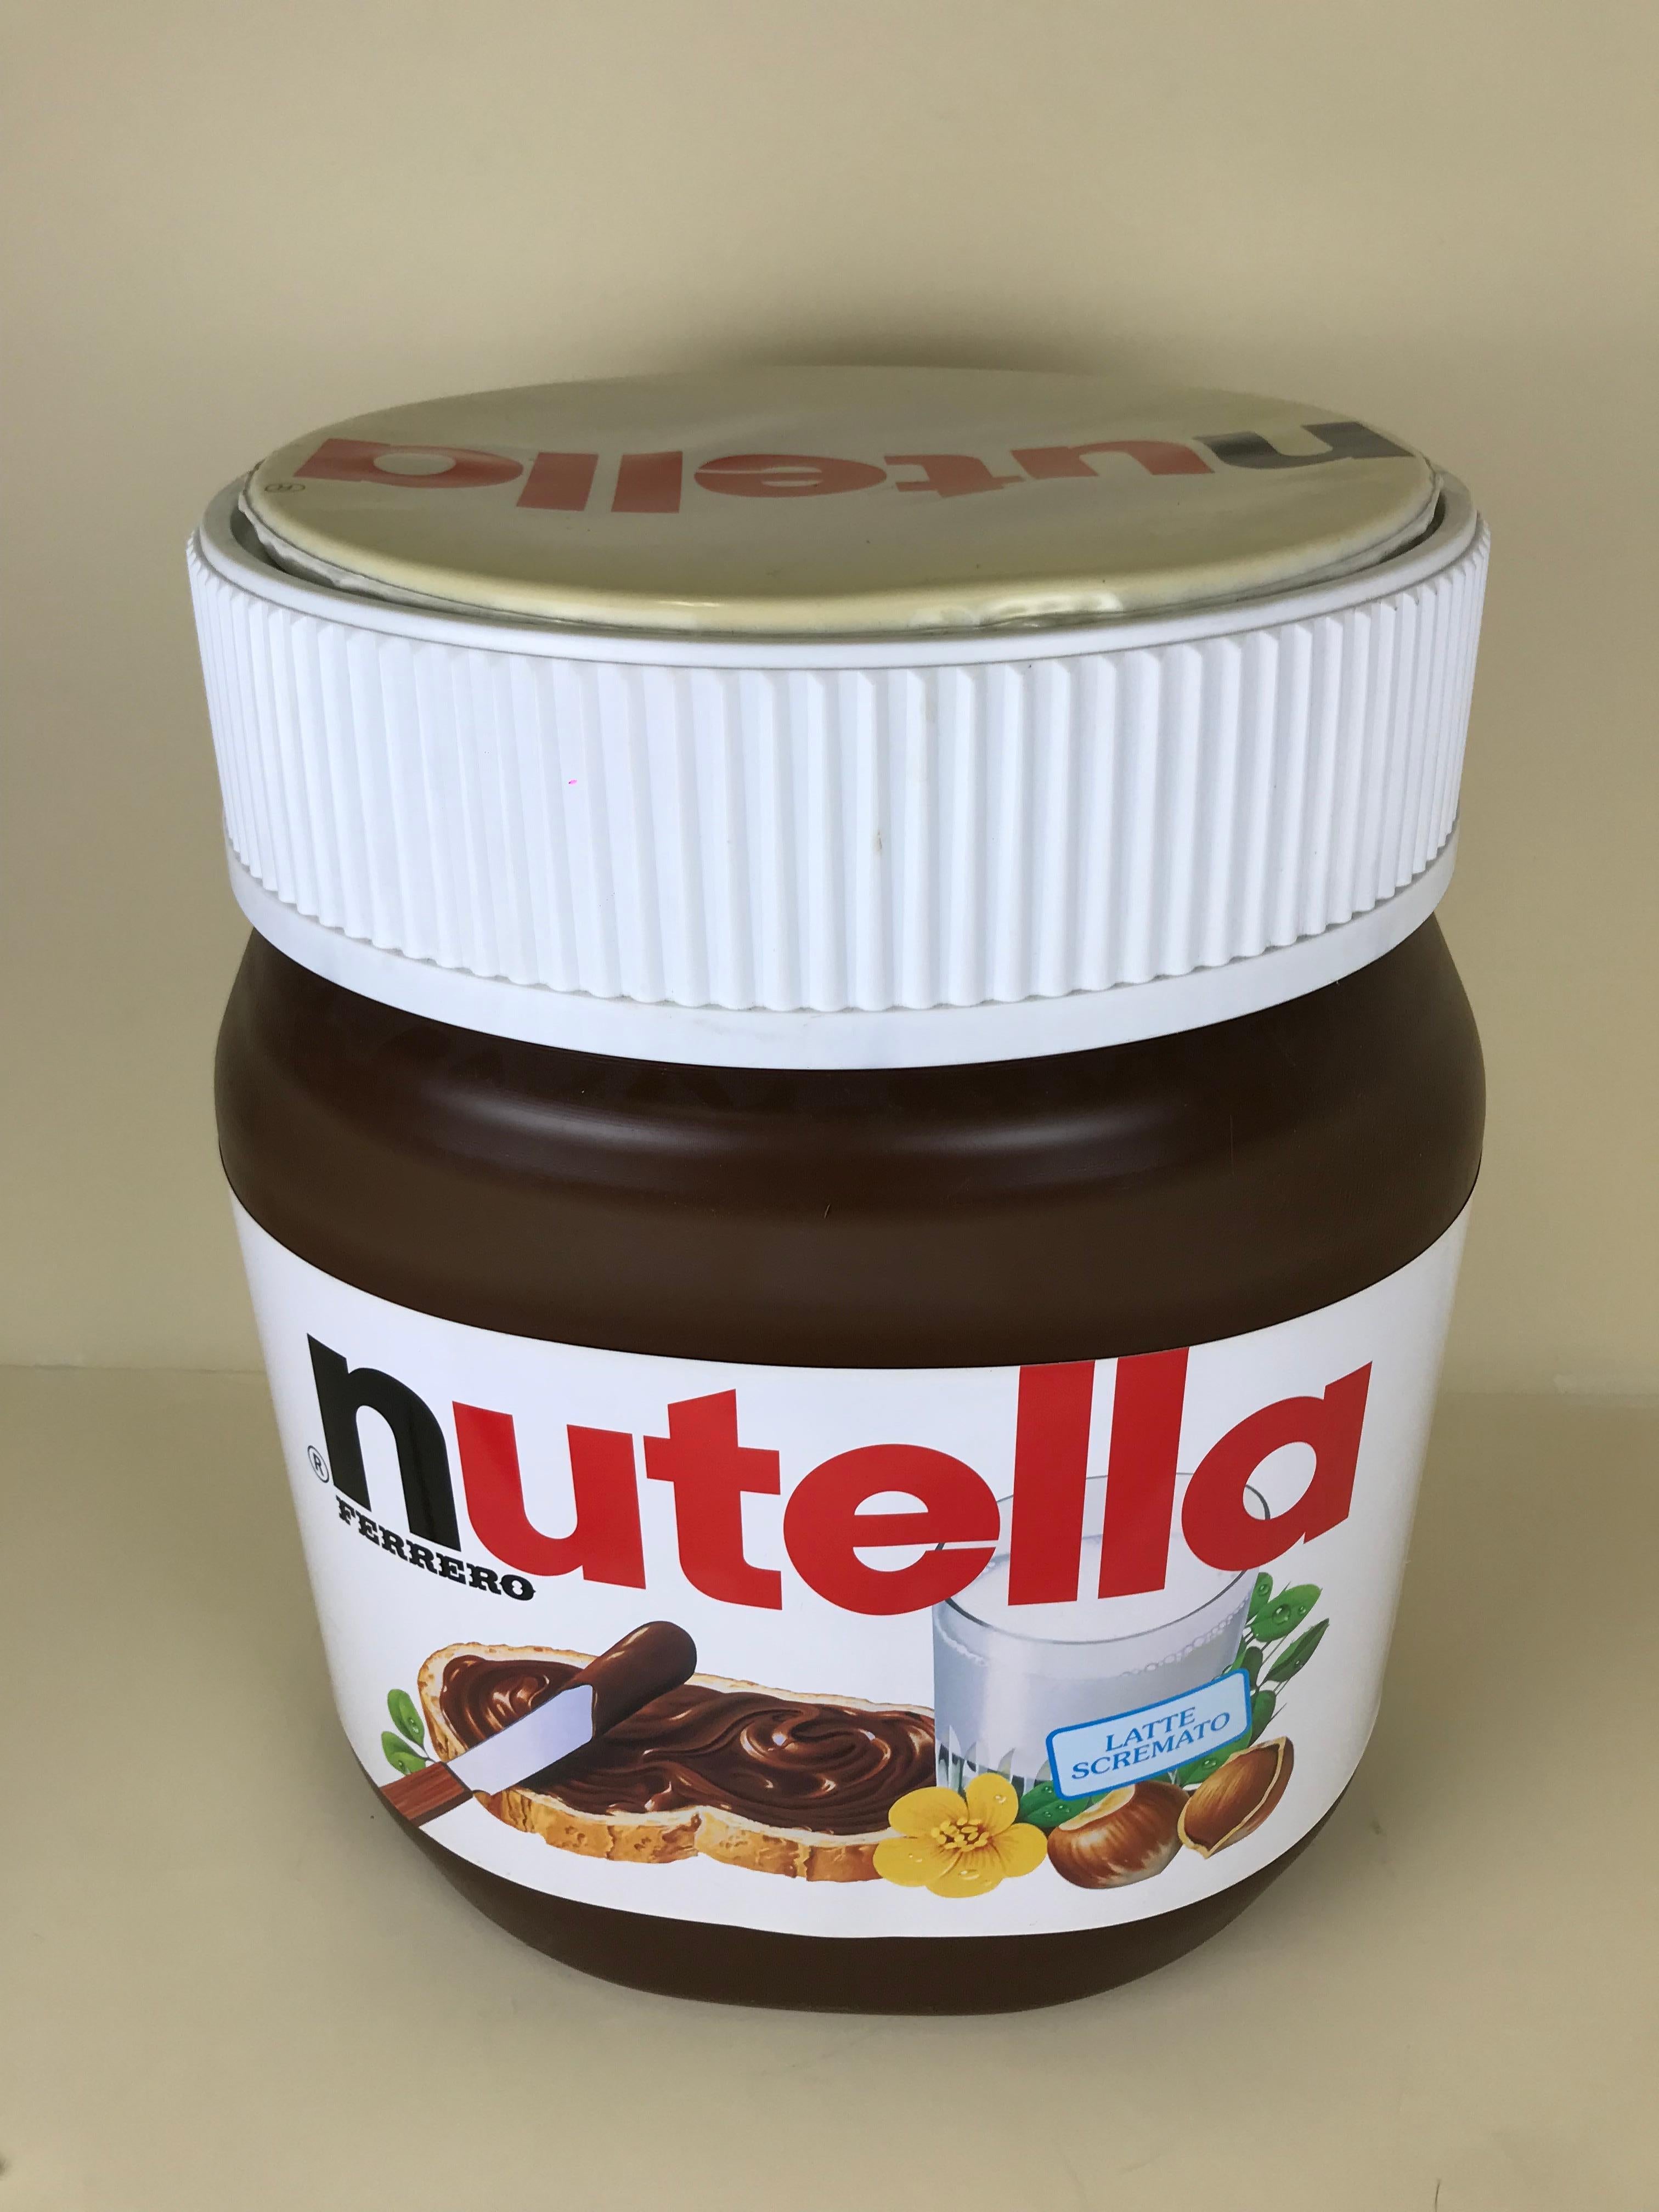 Vintage plastic Ferrero Nutella stool created in Italy for marketing and advertising in the 1980s.

This highly collectible stool has a removable pillow top.

Dimensions stool: 46 cm W x 37 cm D x 52cm H

Dimensions seat: 37 Ø